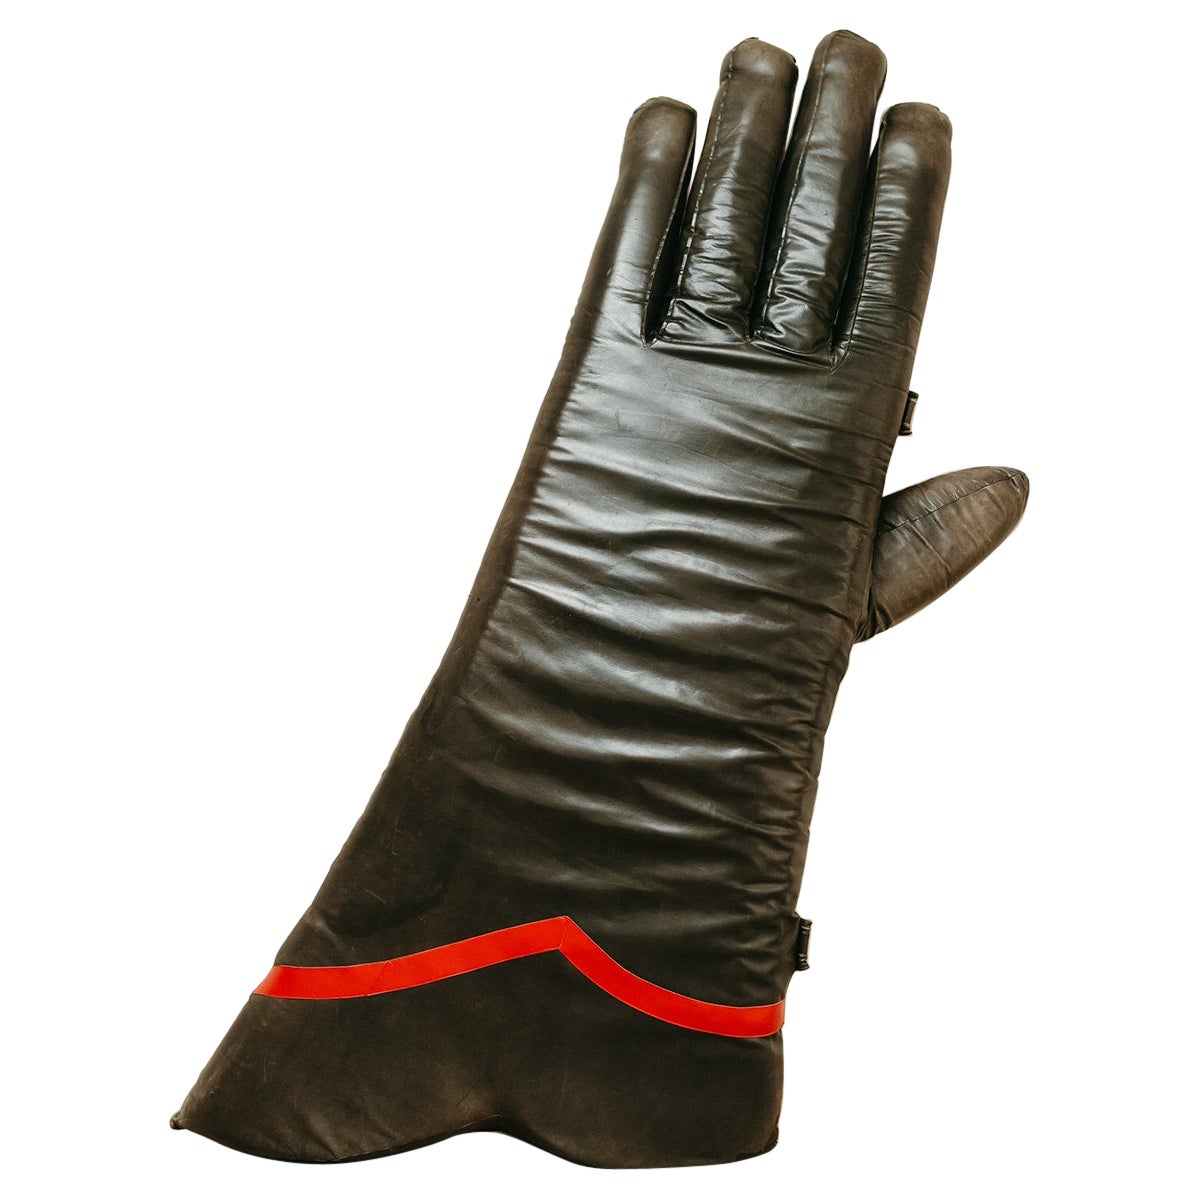 mid 20th century xxl leather glove, publicity sign from Italian shop ... For Sale